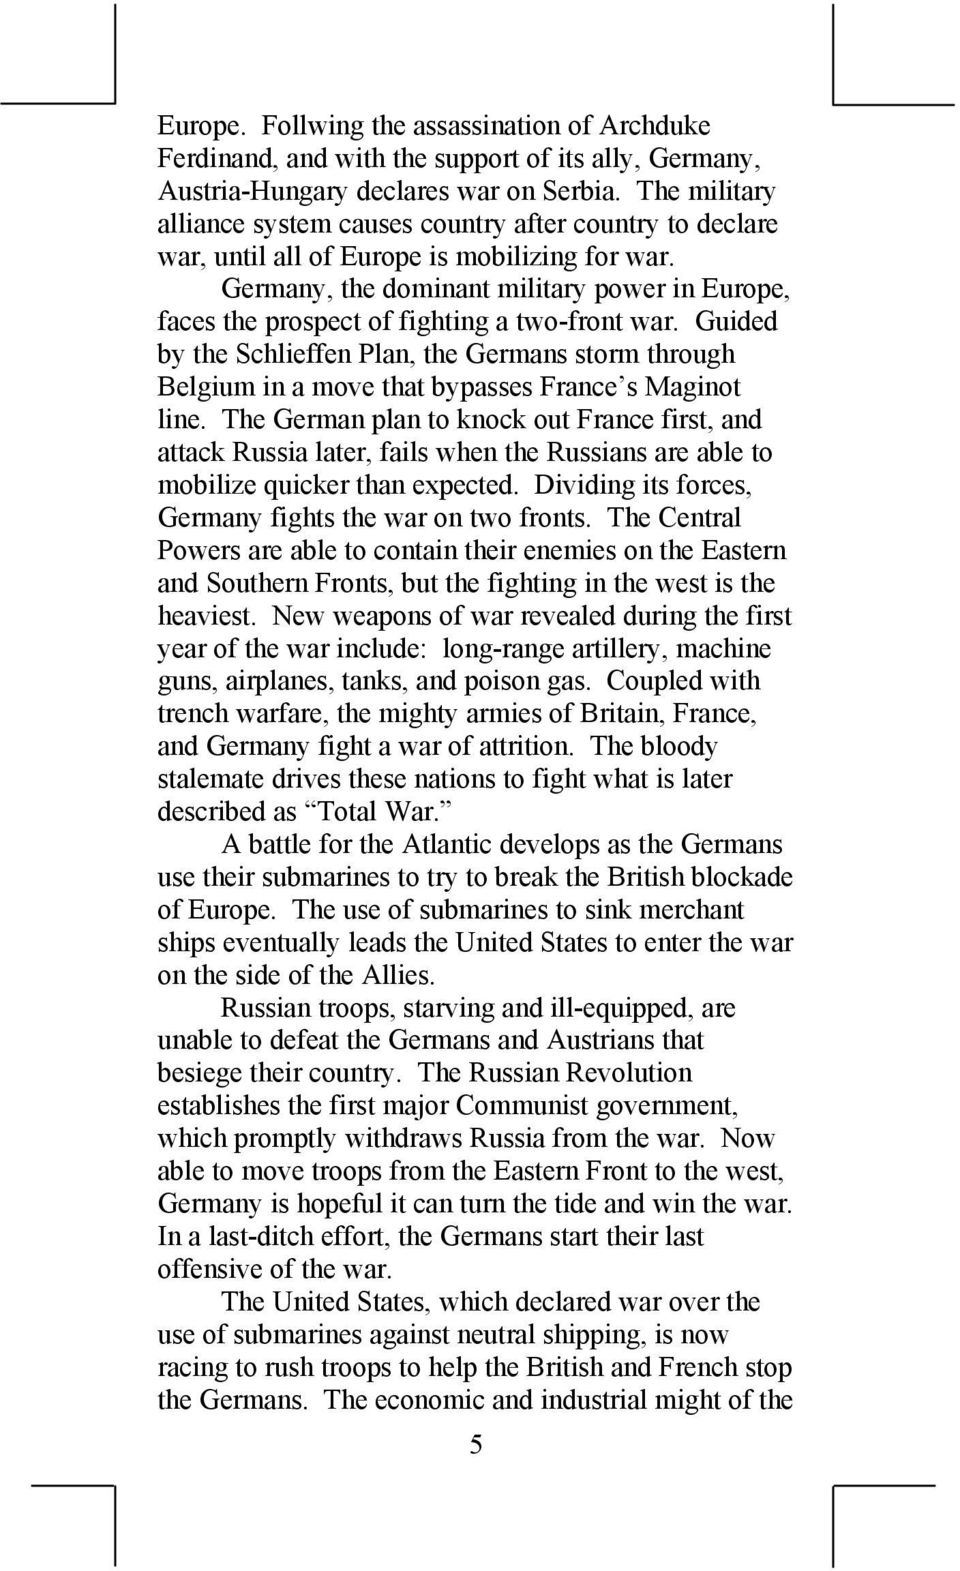 Germany, the dominant military power in Europe, faces the prospect of fighting a two-front war.